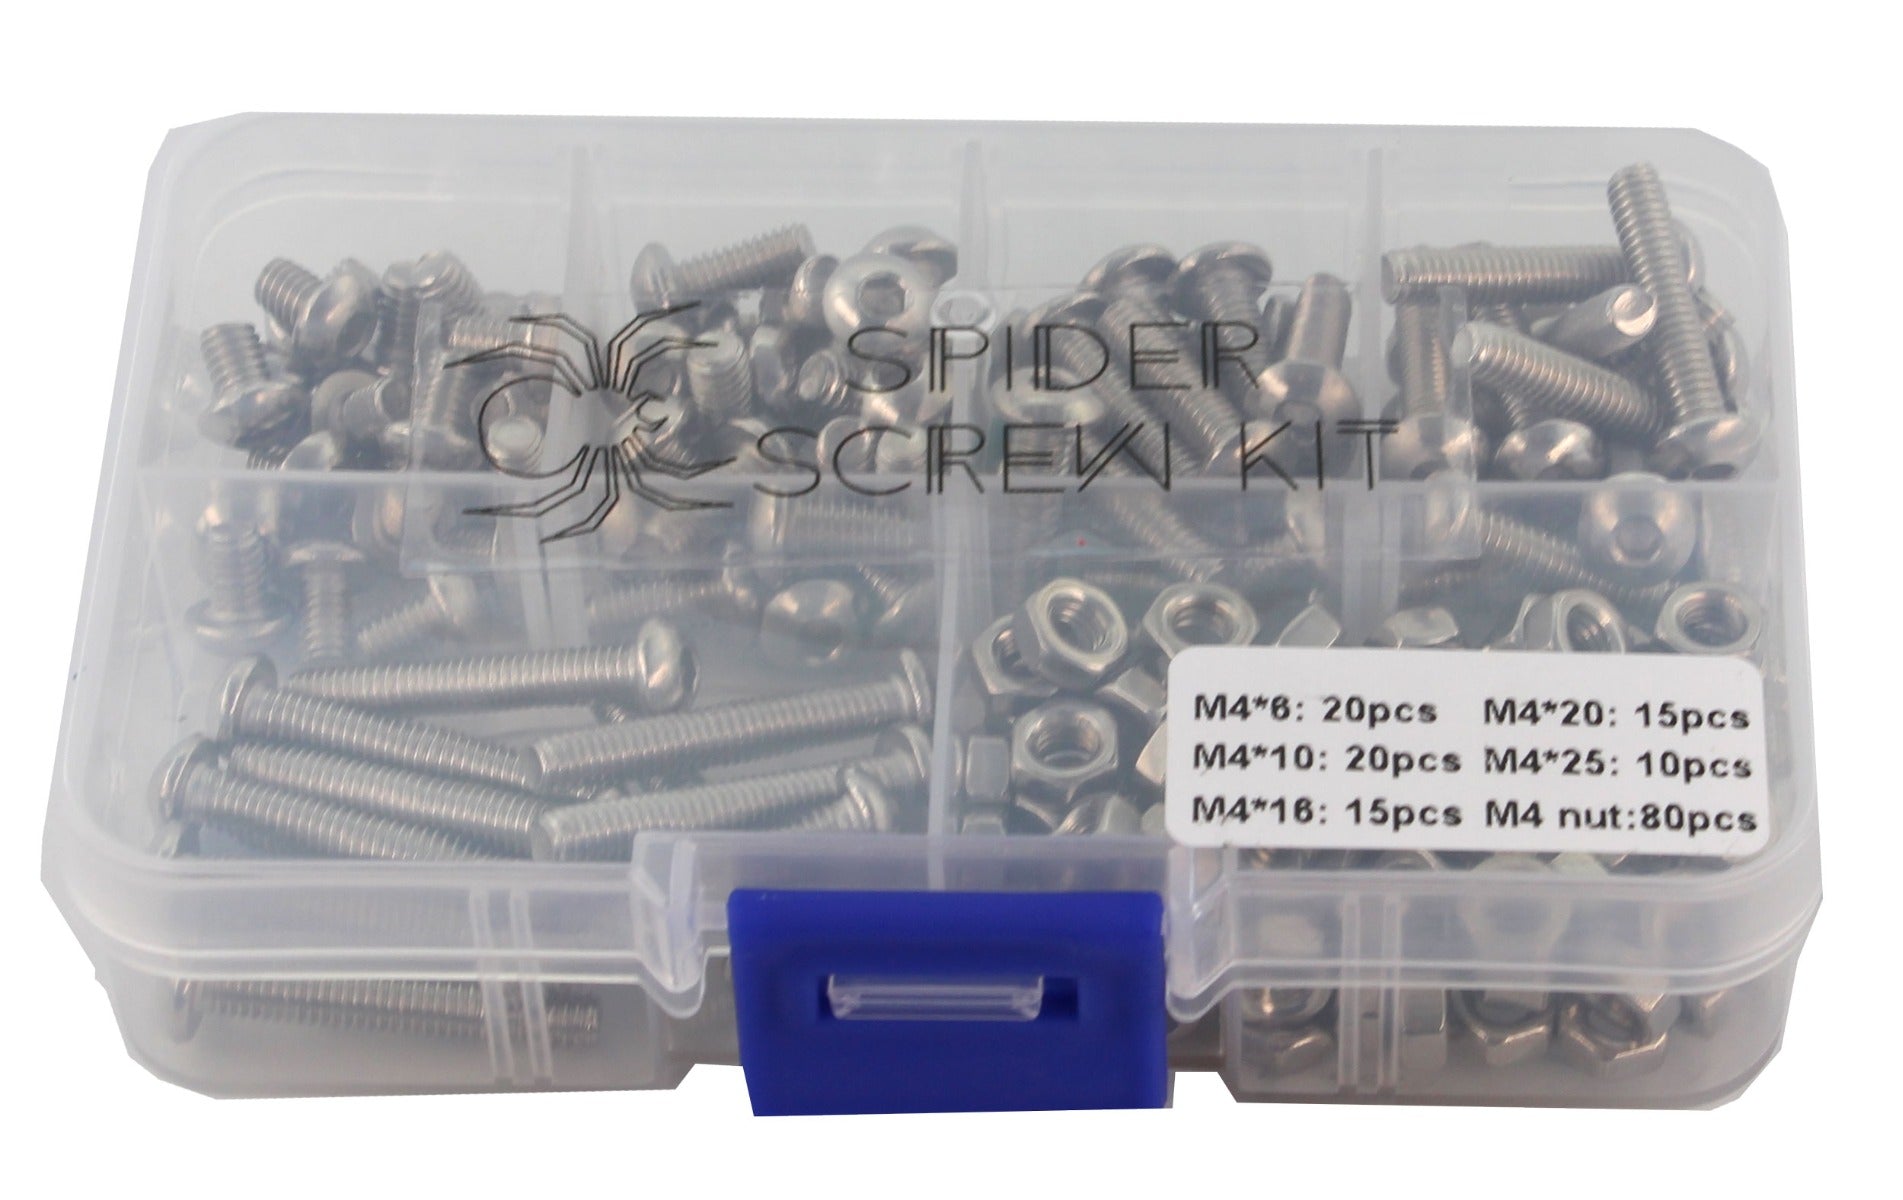 SpiderScrew Kit with Nuts - M4 - 80 pcs